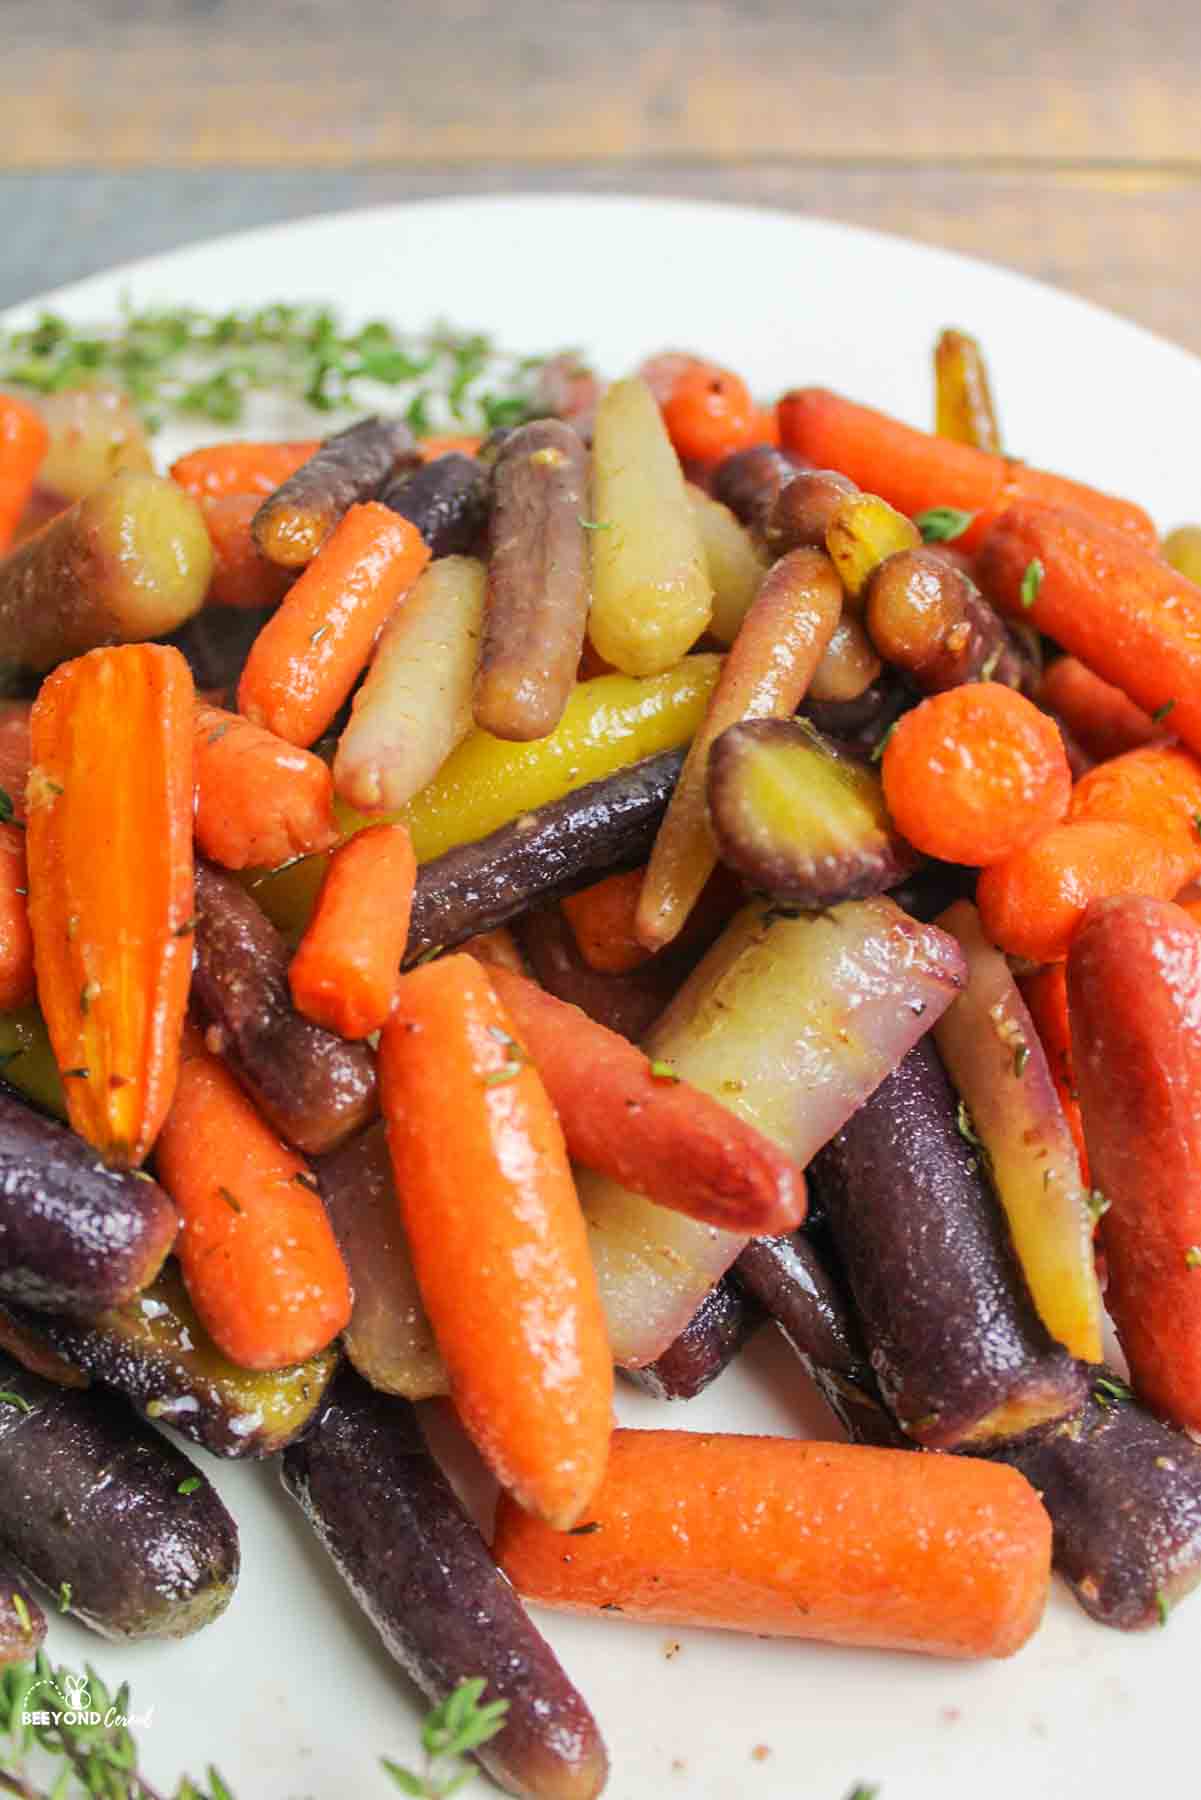 an upclose view of roasted rainbow baby carrots on a plate with fresh thyme